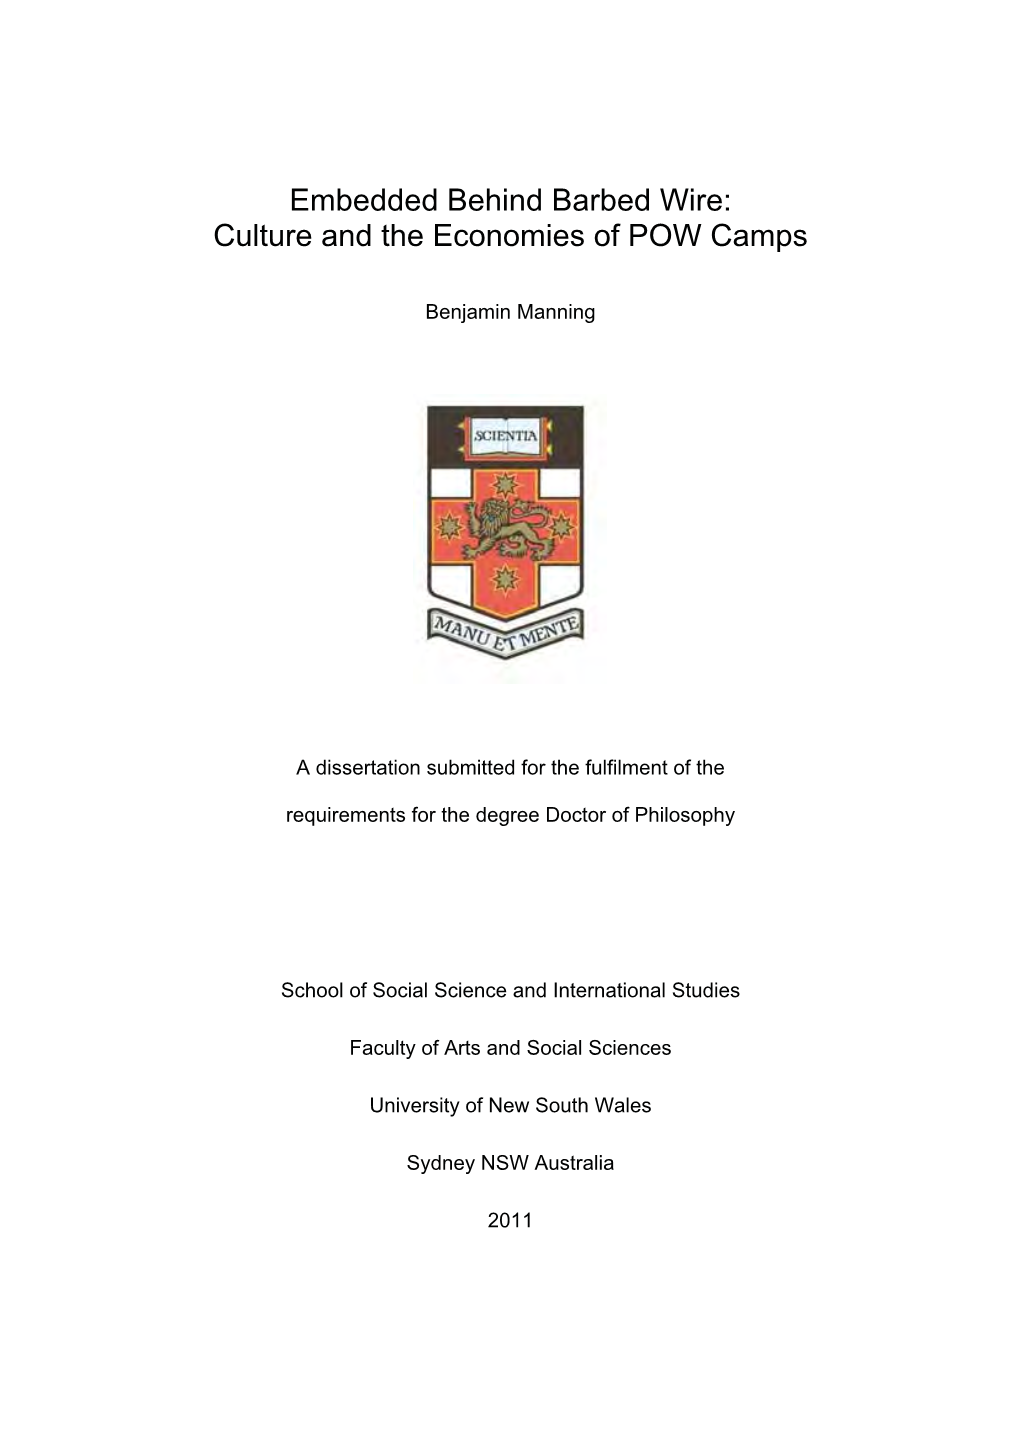 Culture and the Economies of POW Camps